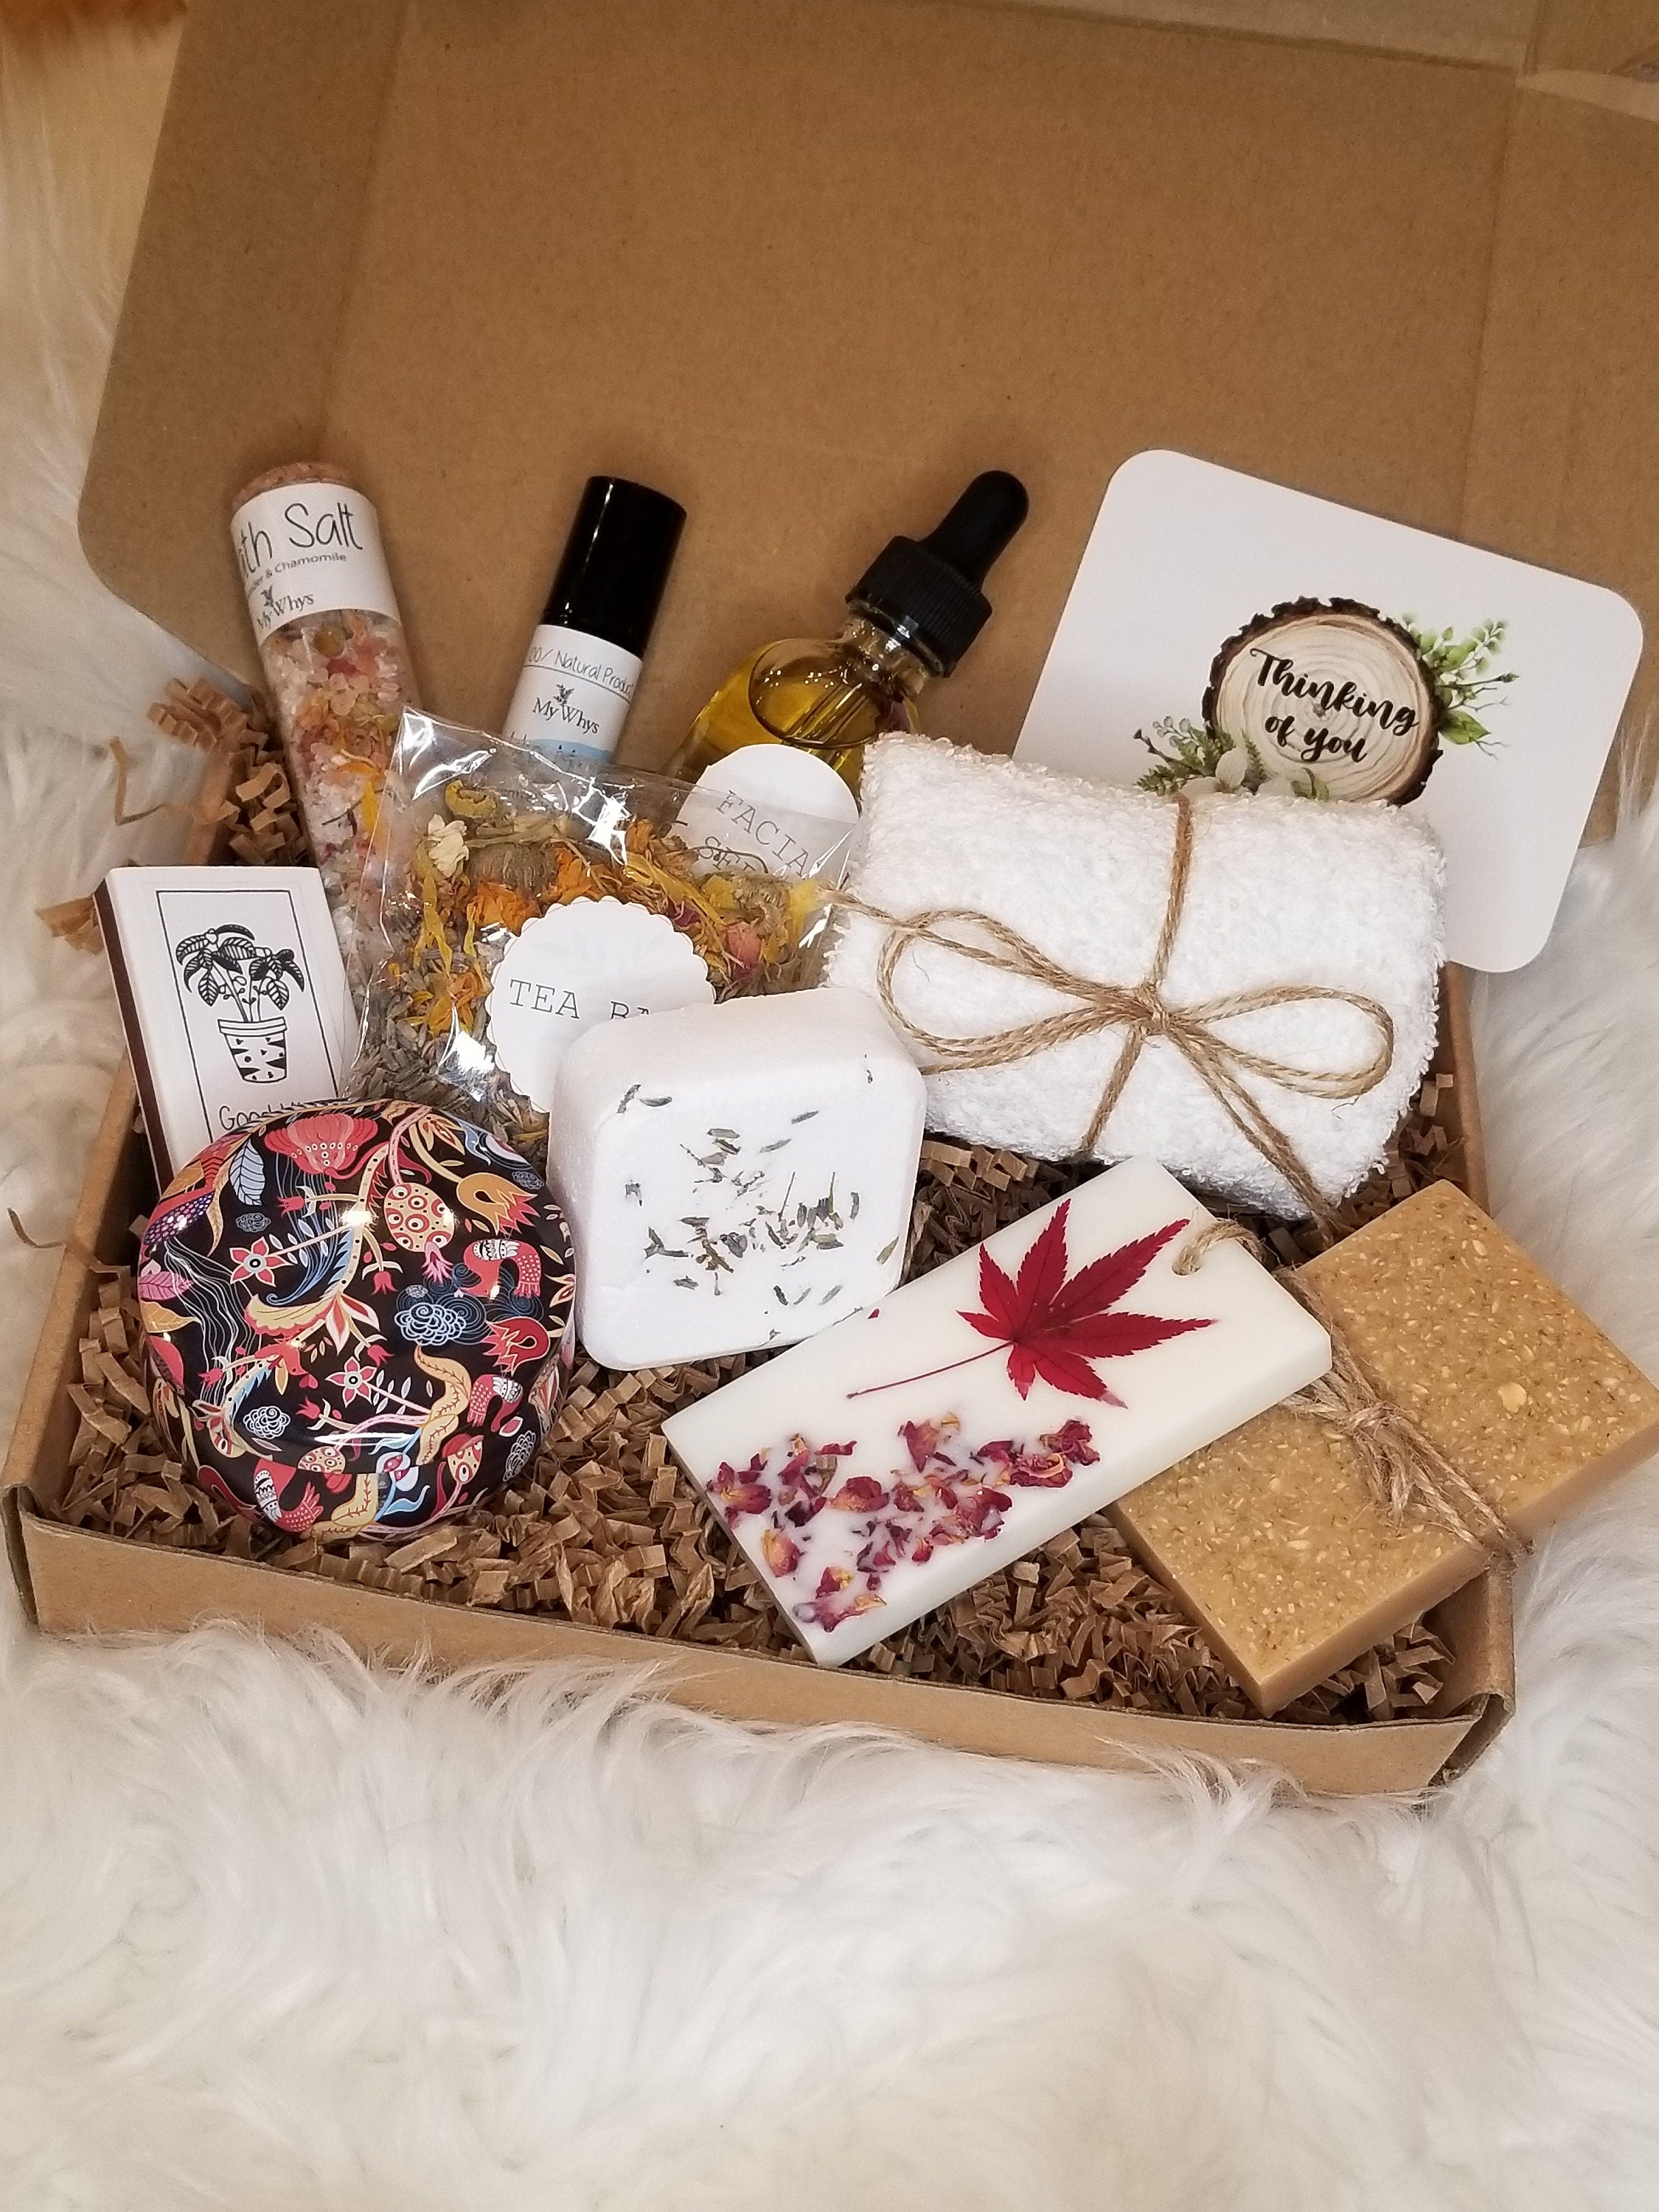 Beauty Box, Care Package, Gift Basket for Woman, Christmas Gift for Woman,  Gift Box, Gift Set, Self Care Box, Self Care Gift, Self Care Kit - Etsy